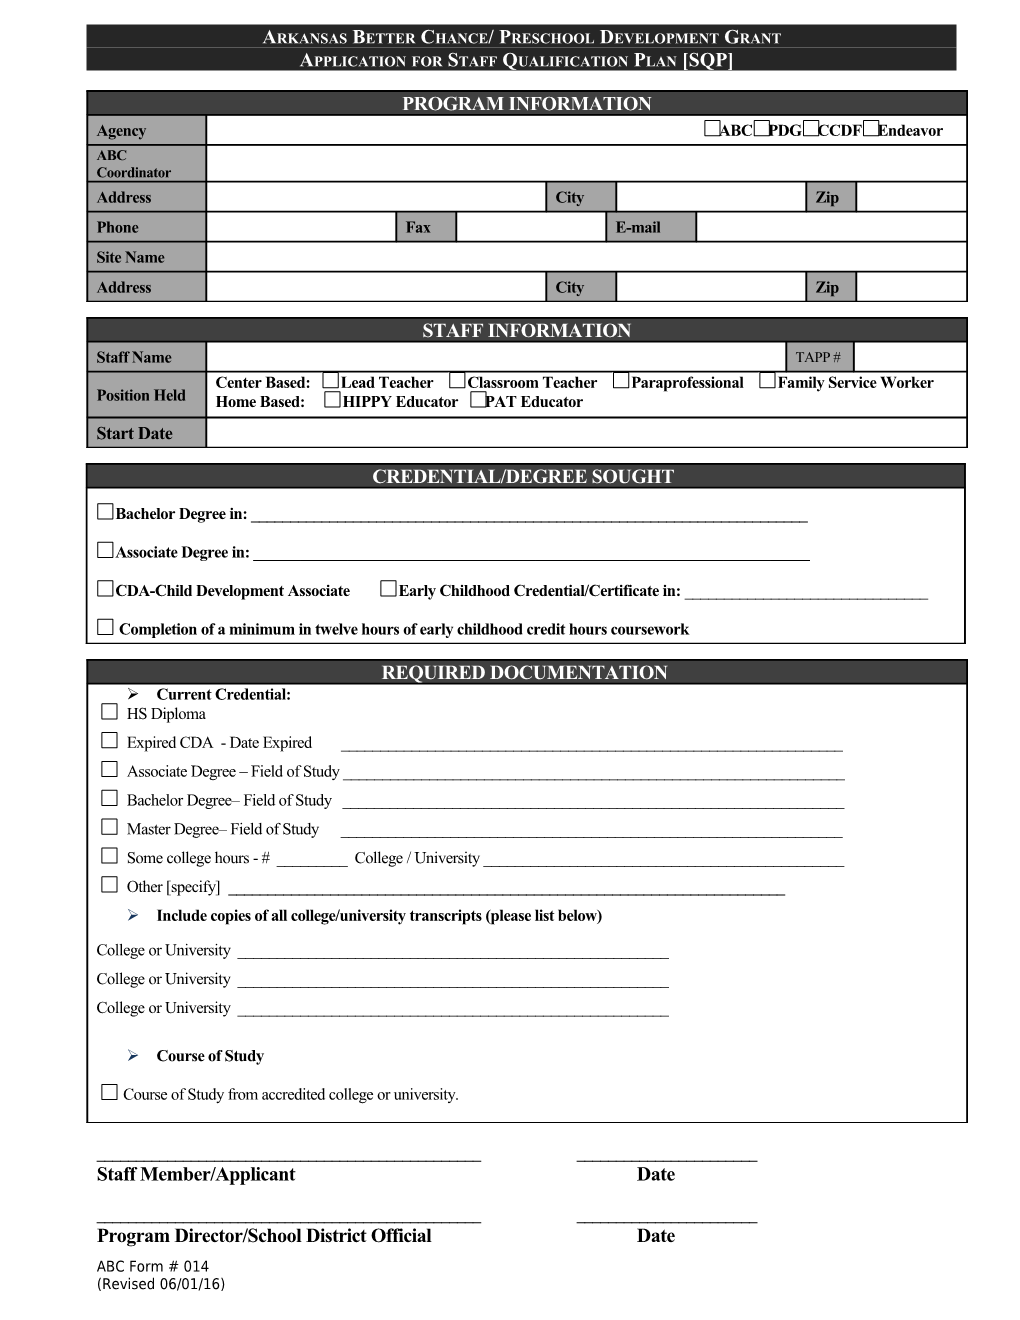 Application for Staff Qualifications Plan